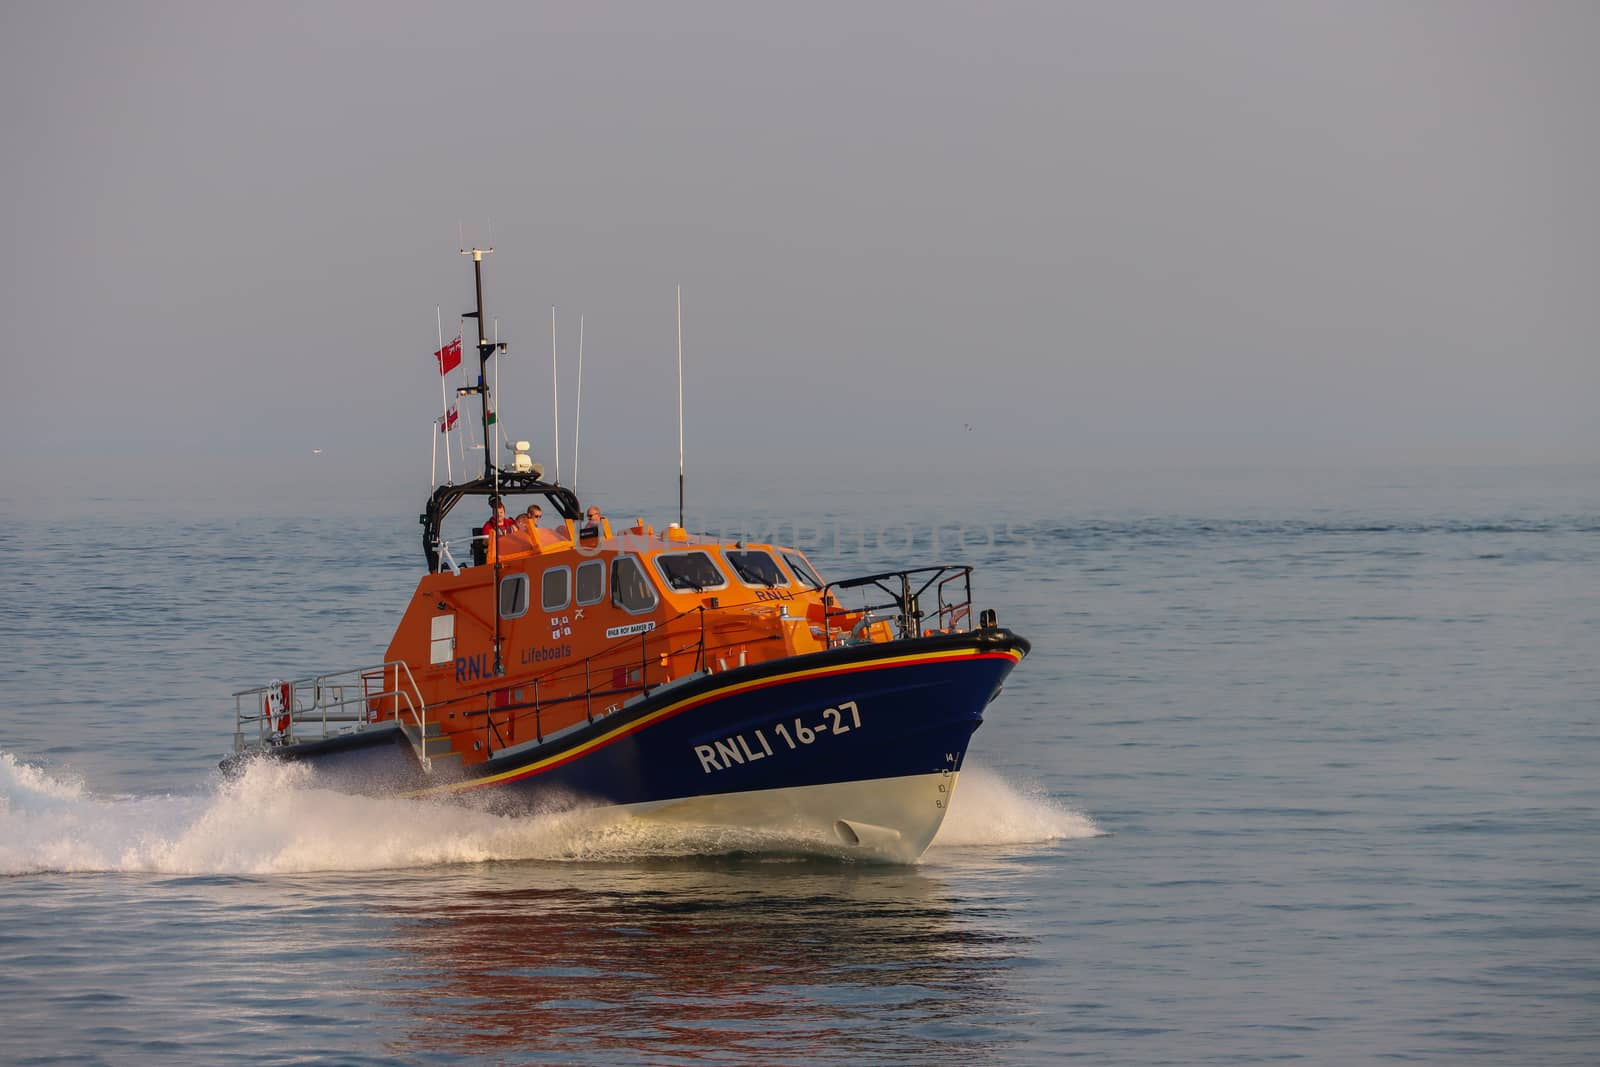 A team of coast guards on a RNLI Lifeboat travelling over the ocean, leaving from the Mumbles, Swansea, Wales, UK on a misty day on a rescue mission